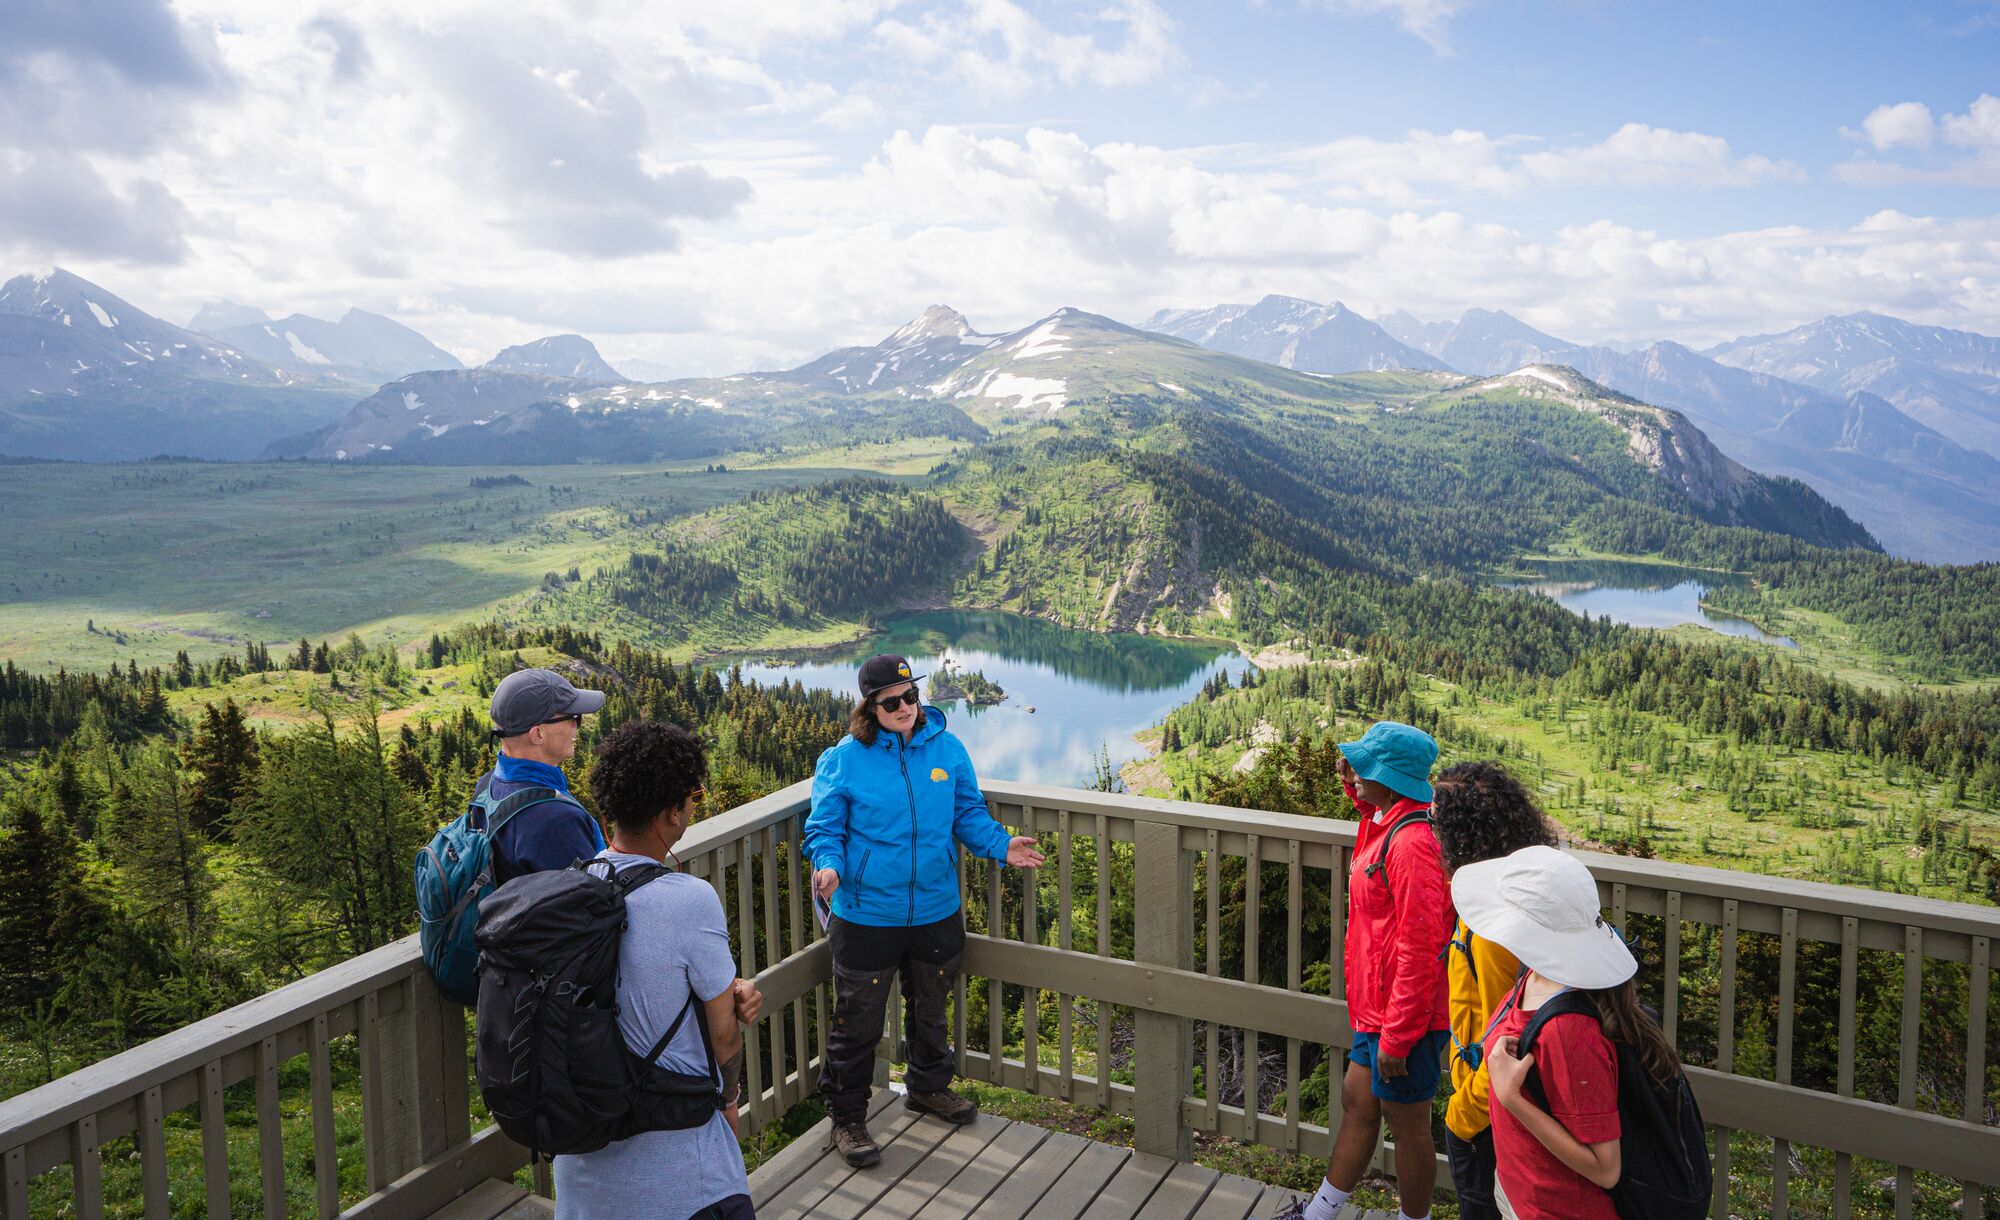 A hiking guide at Sunshine Meadows talks to a group of people at the Standish Lookout viewpoint.